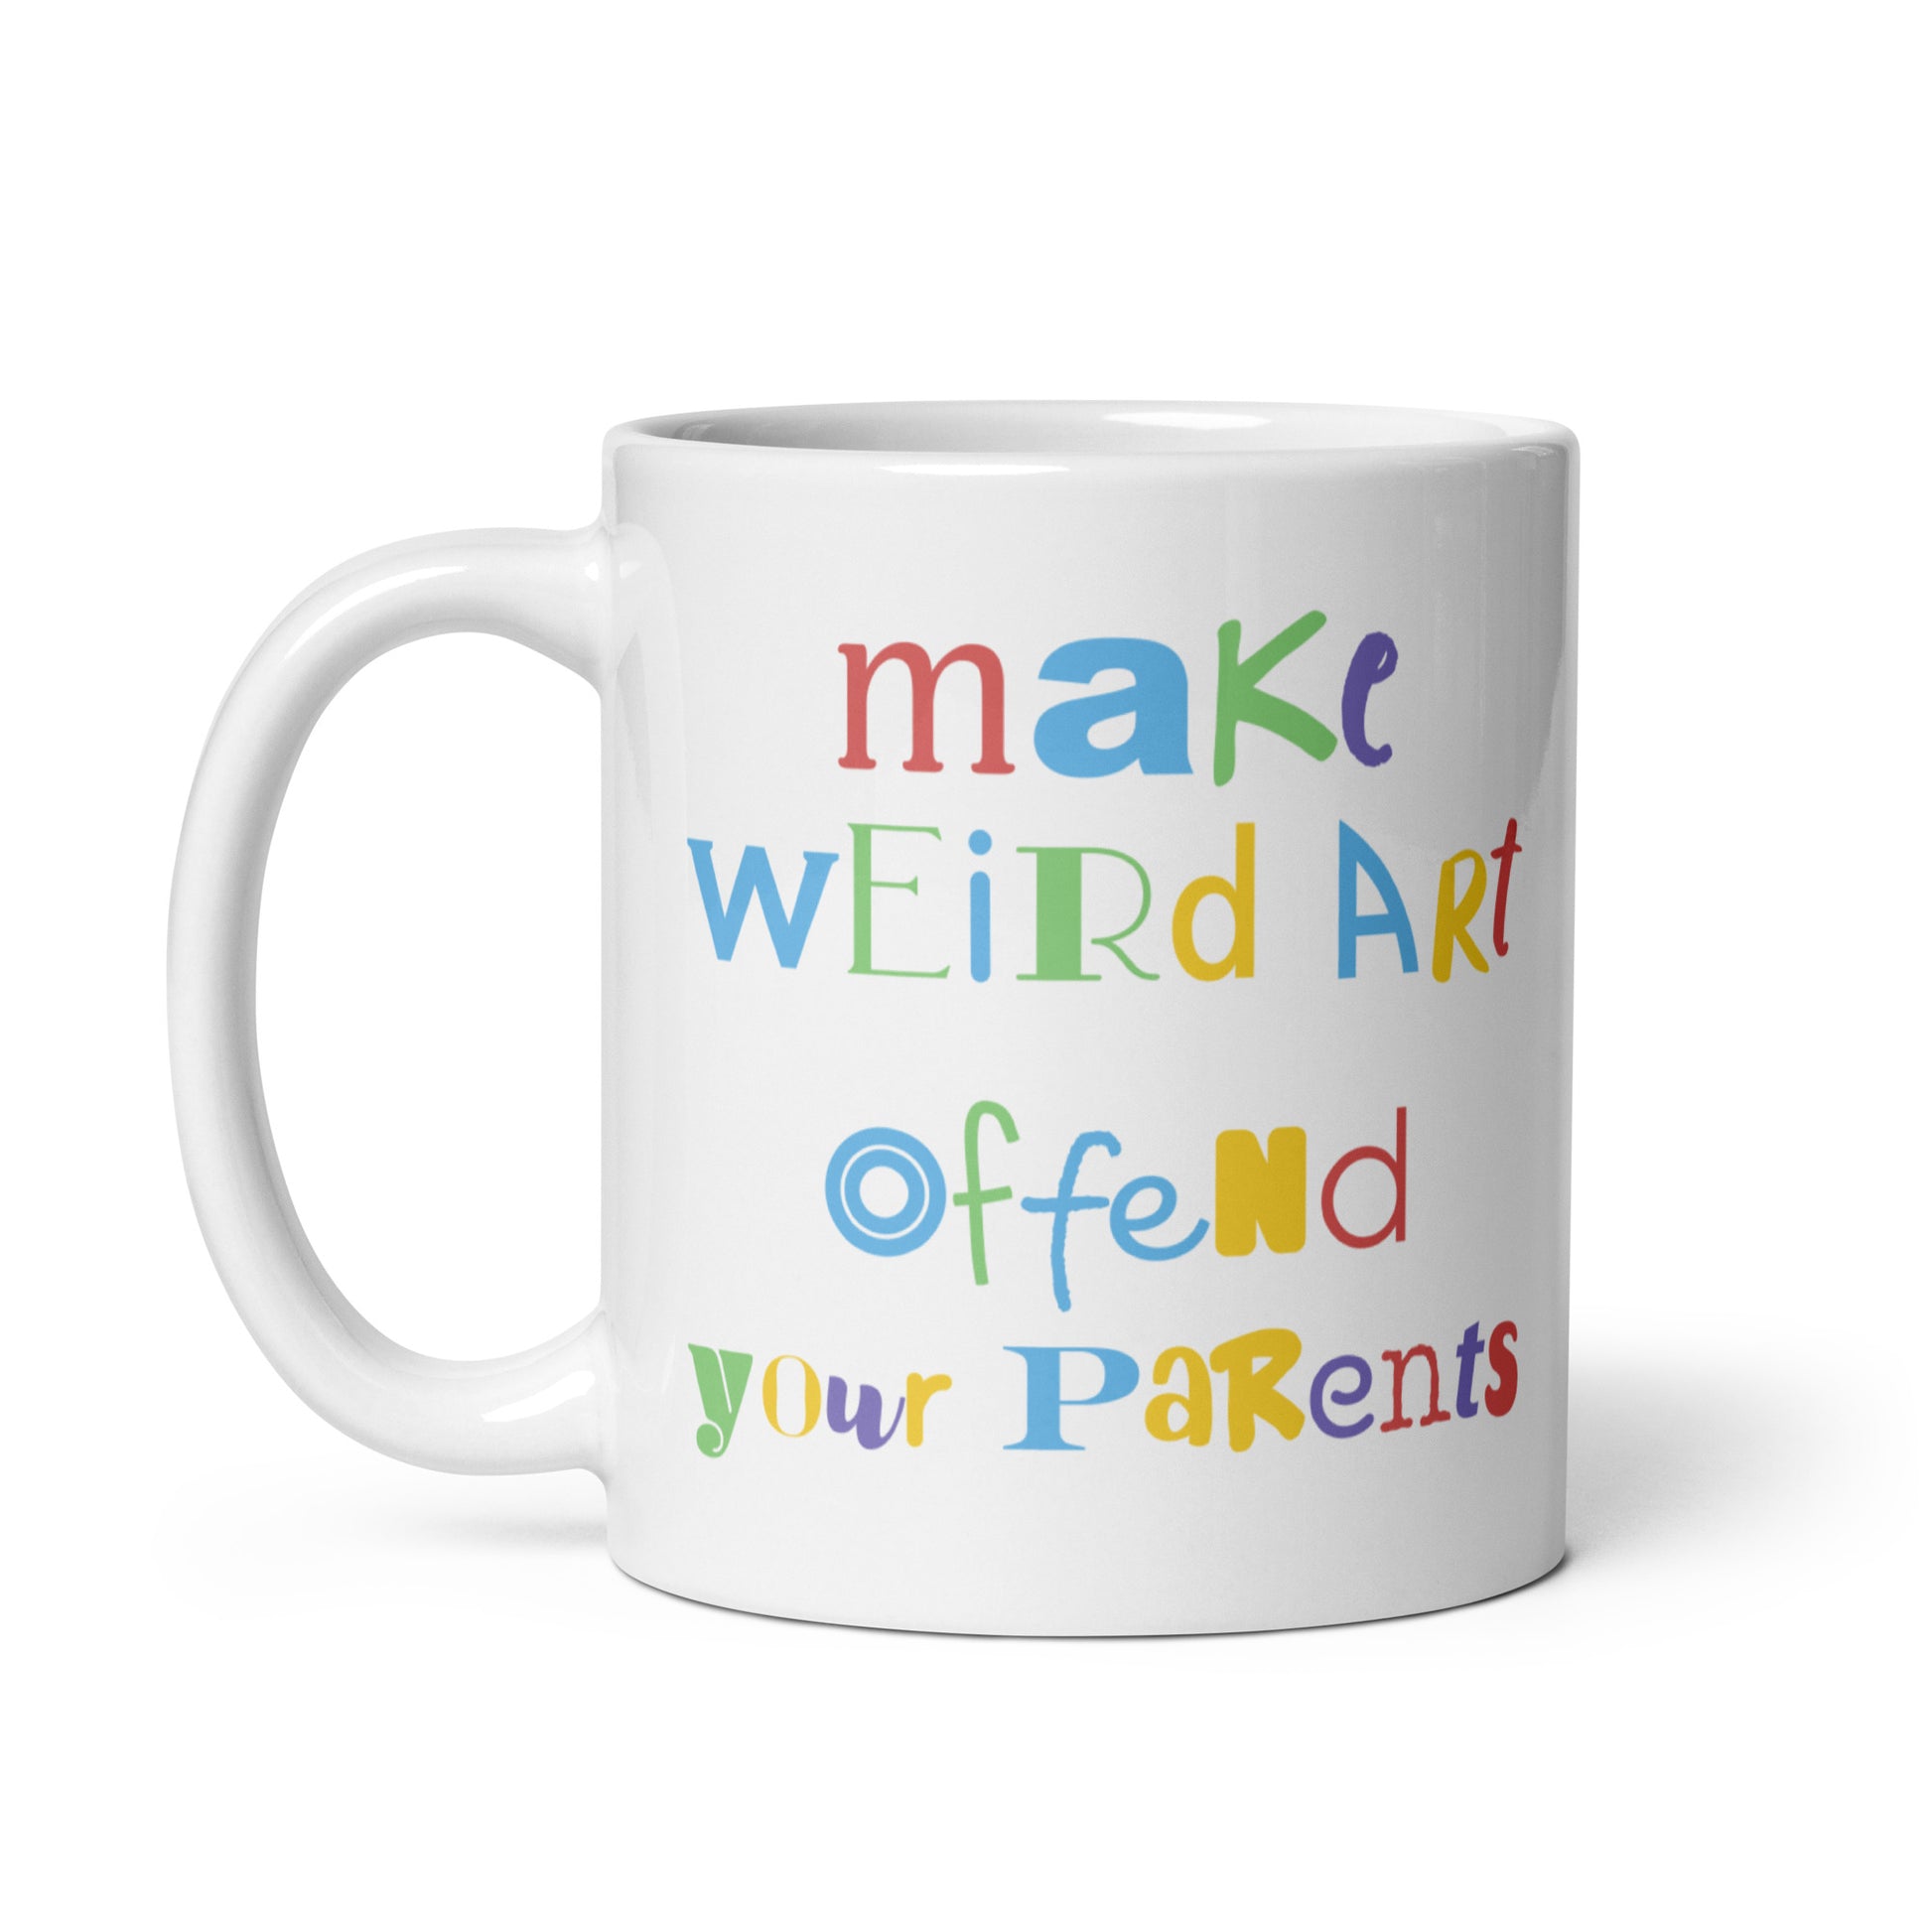 An 11 ounce white ceramic mug featuring text that reads "make weird art, offend your parents" in varying fonts and colors